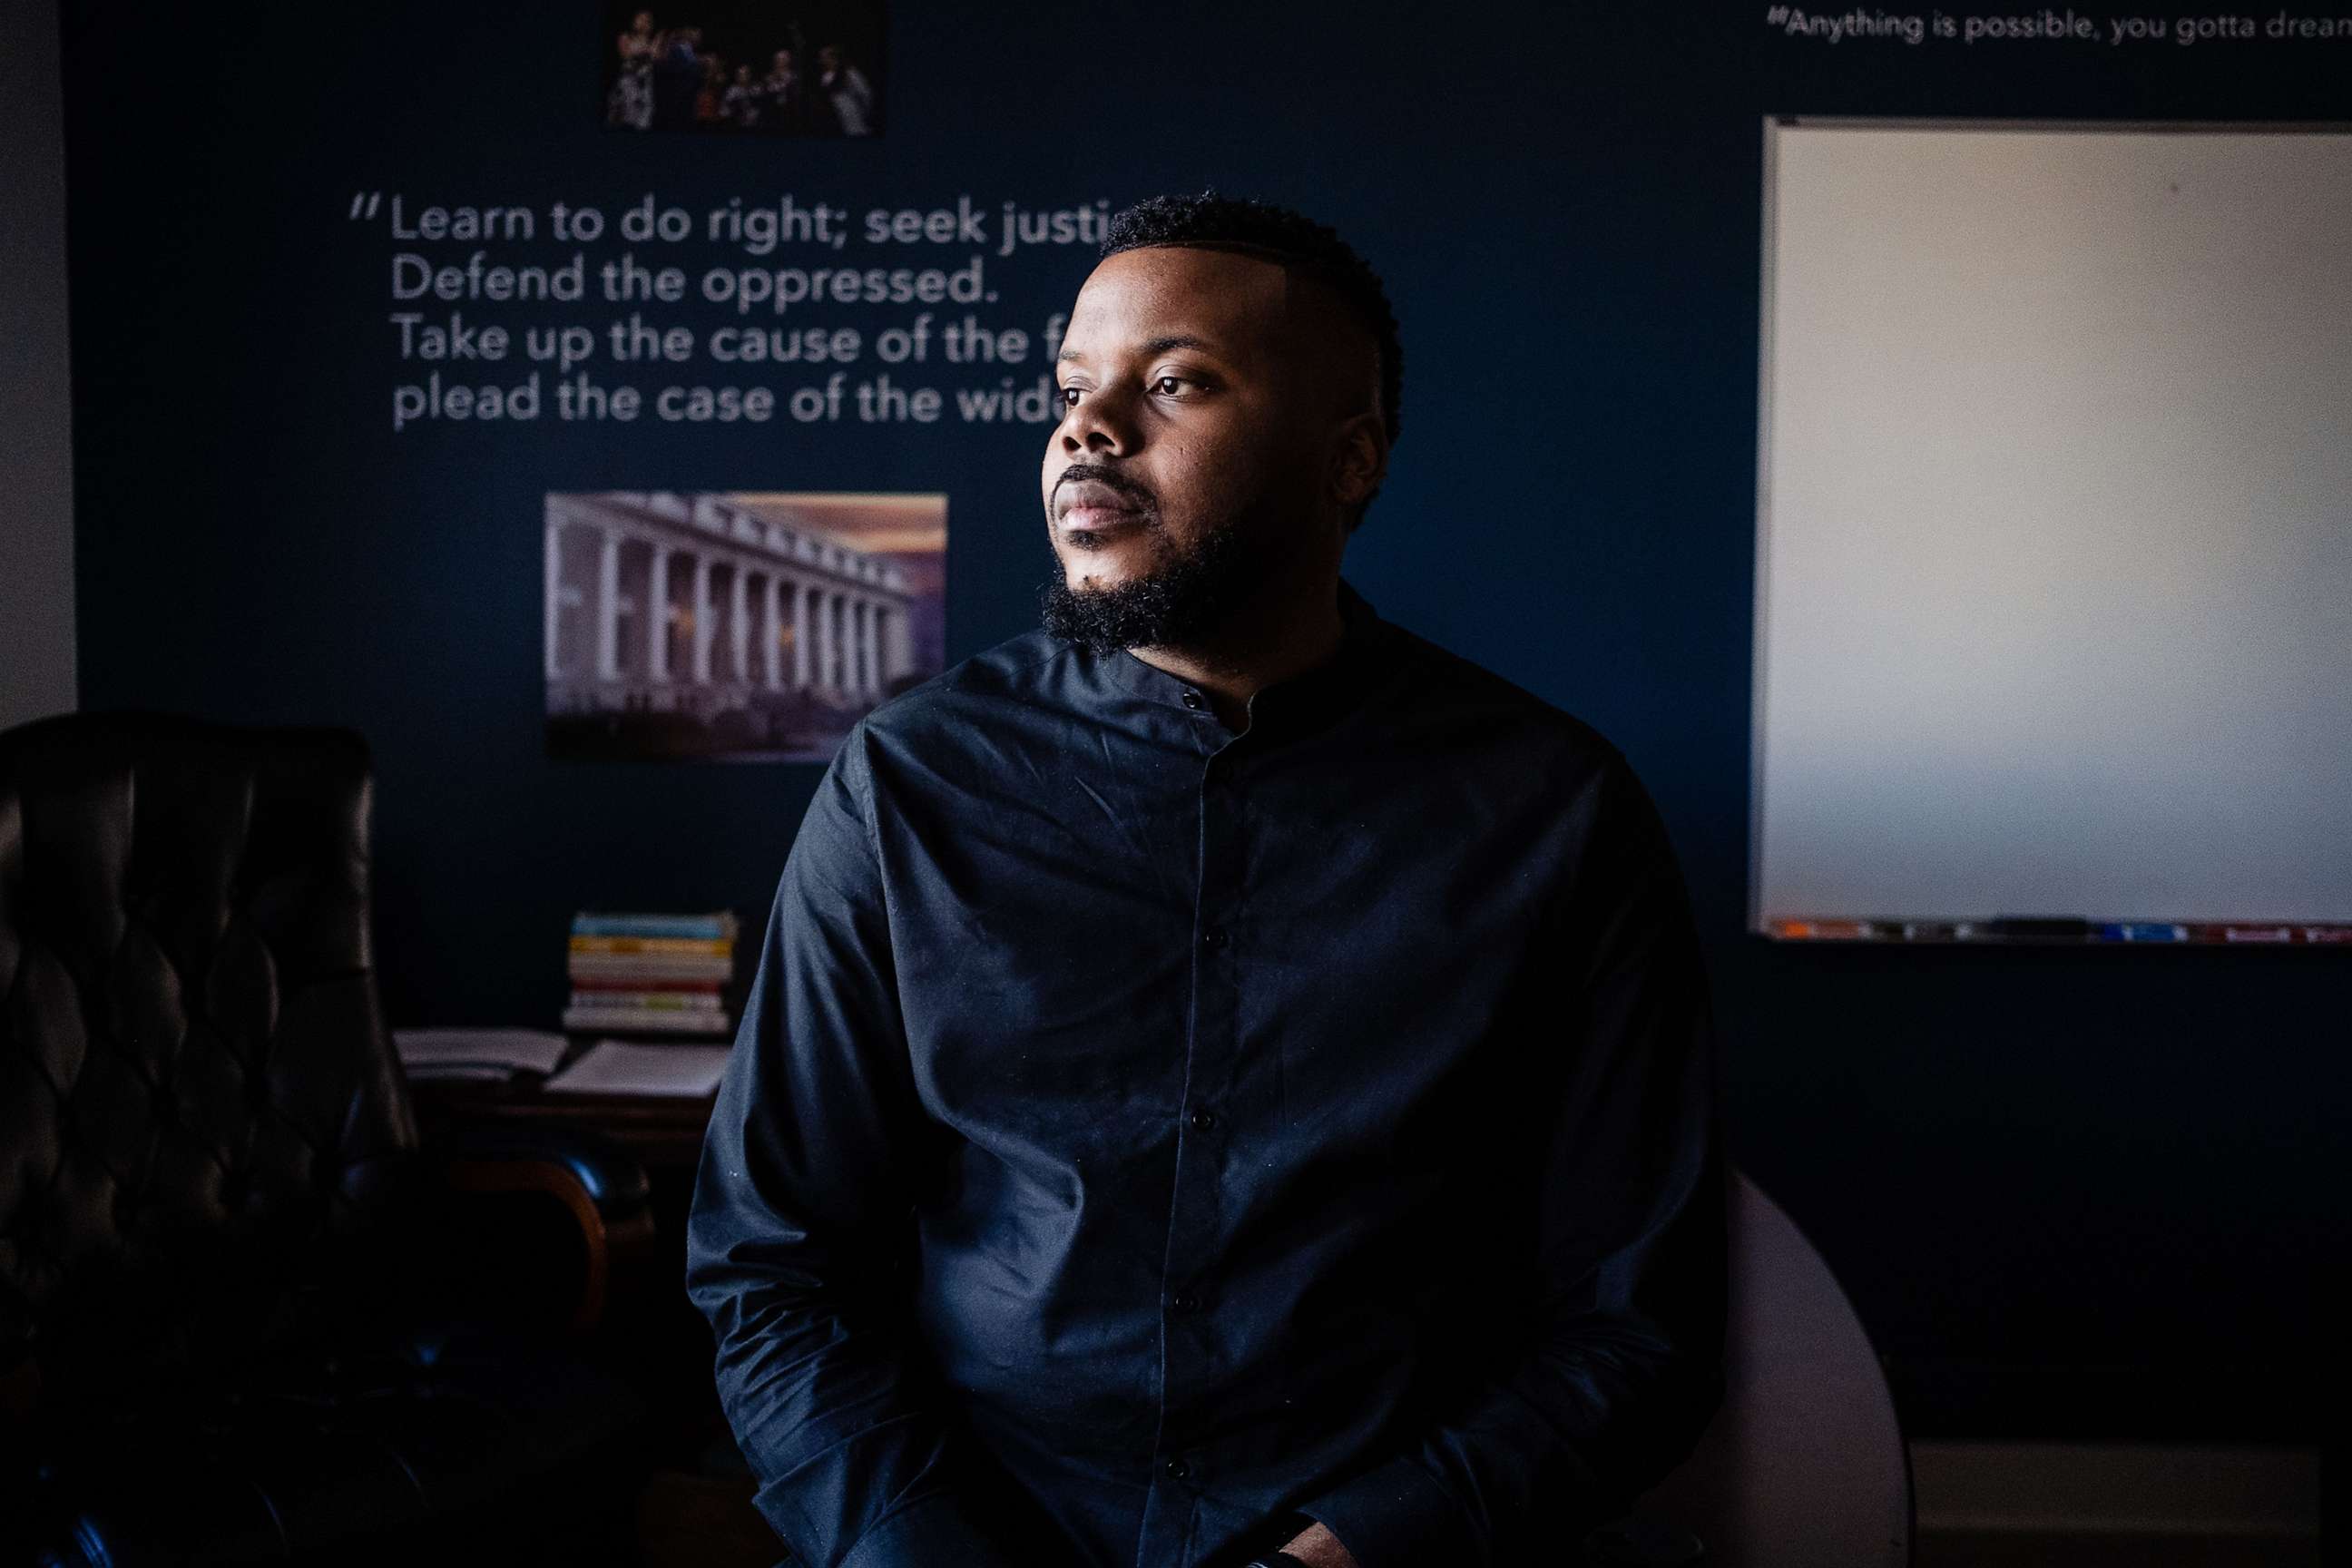 PHOTO: Michael Tubbs poses for a photograph in Stockton, Calif., Feb. 7, 2020.